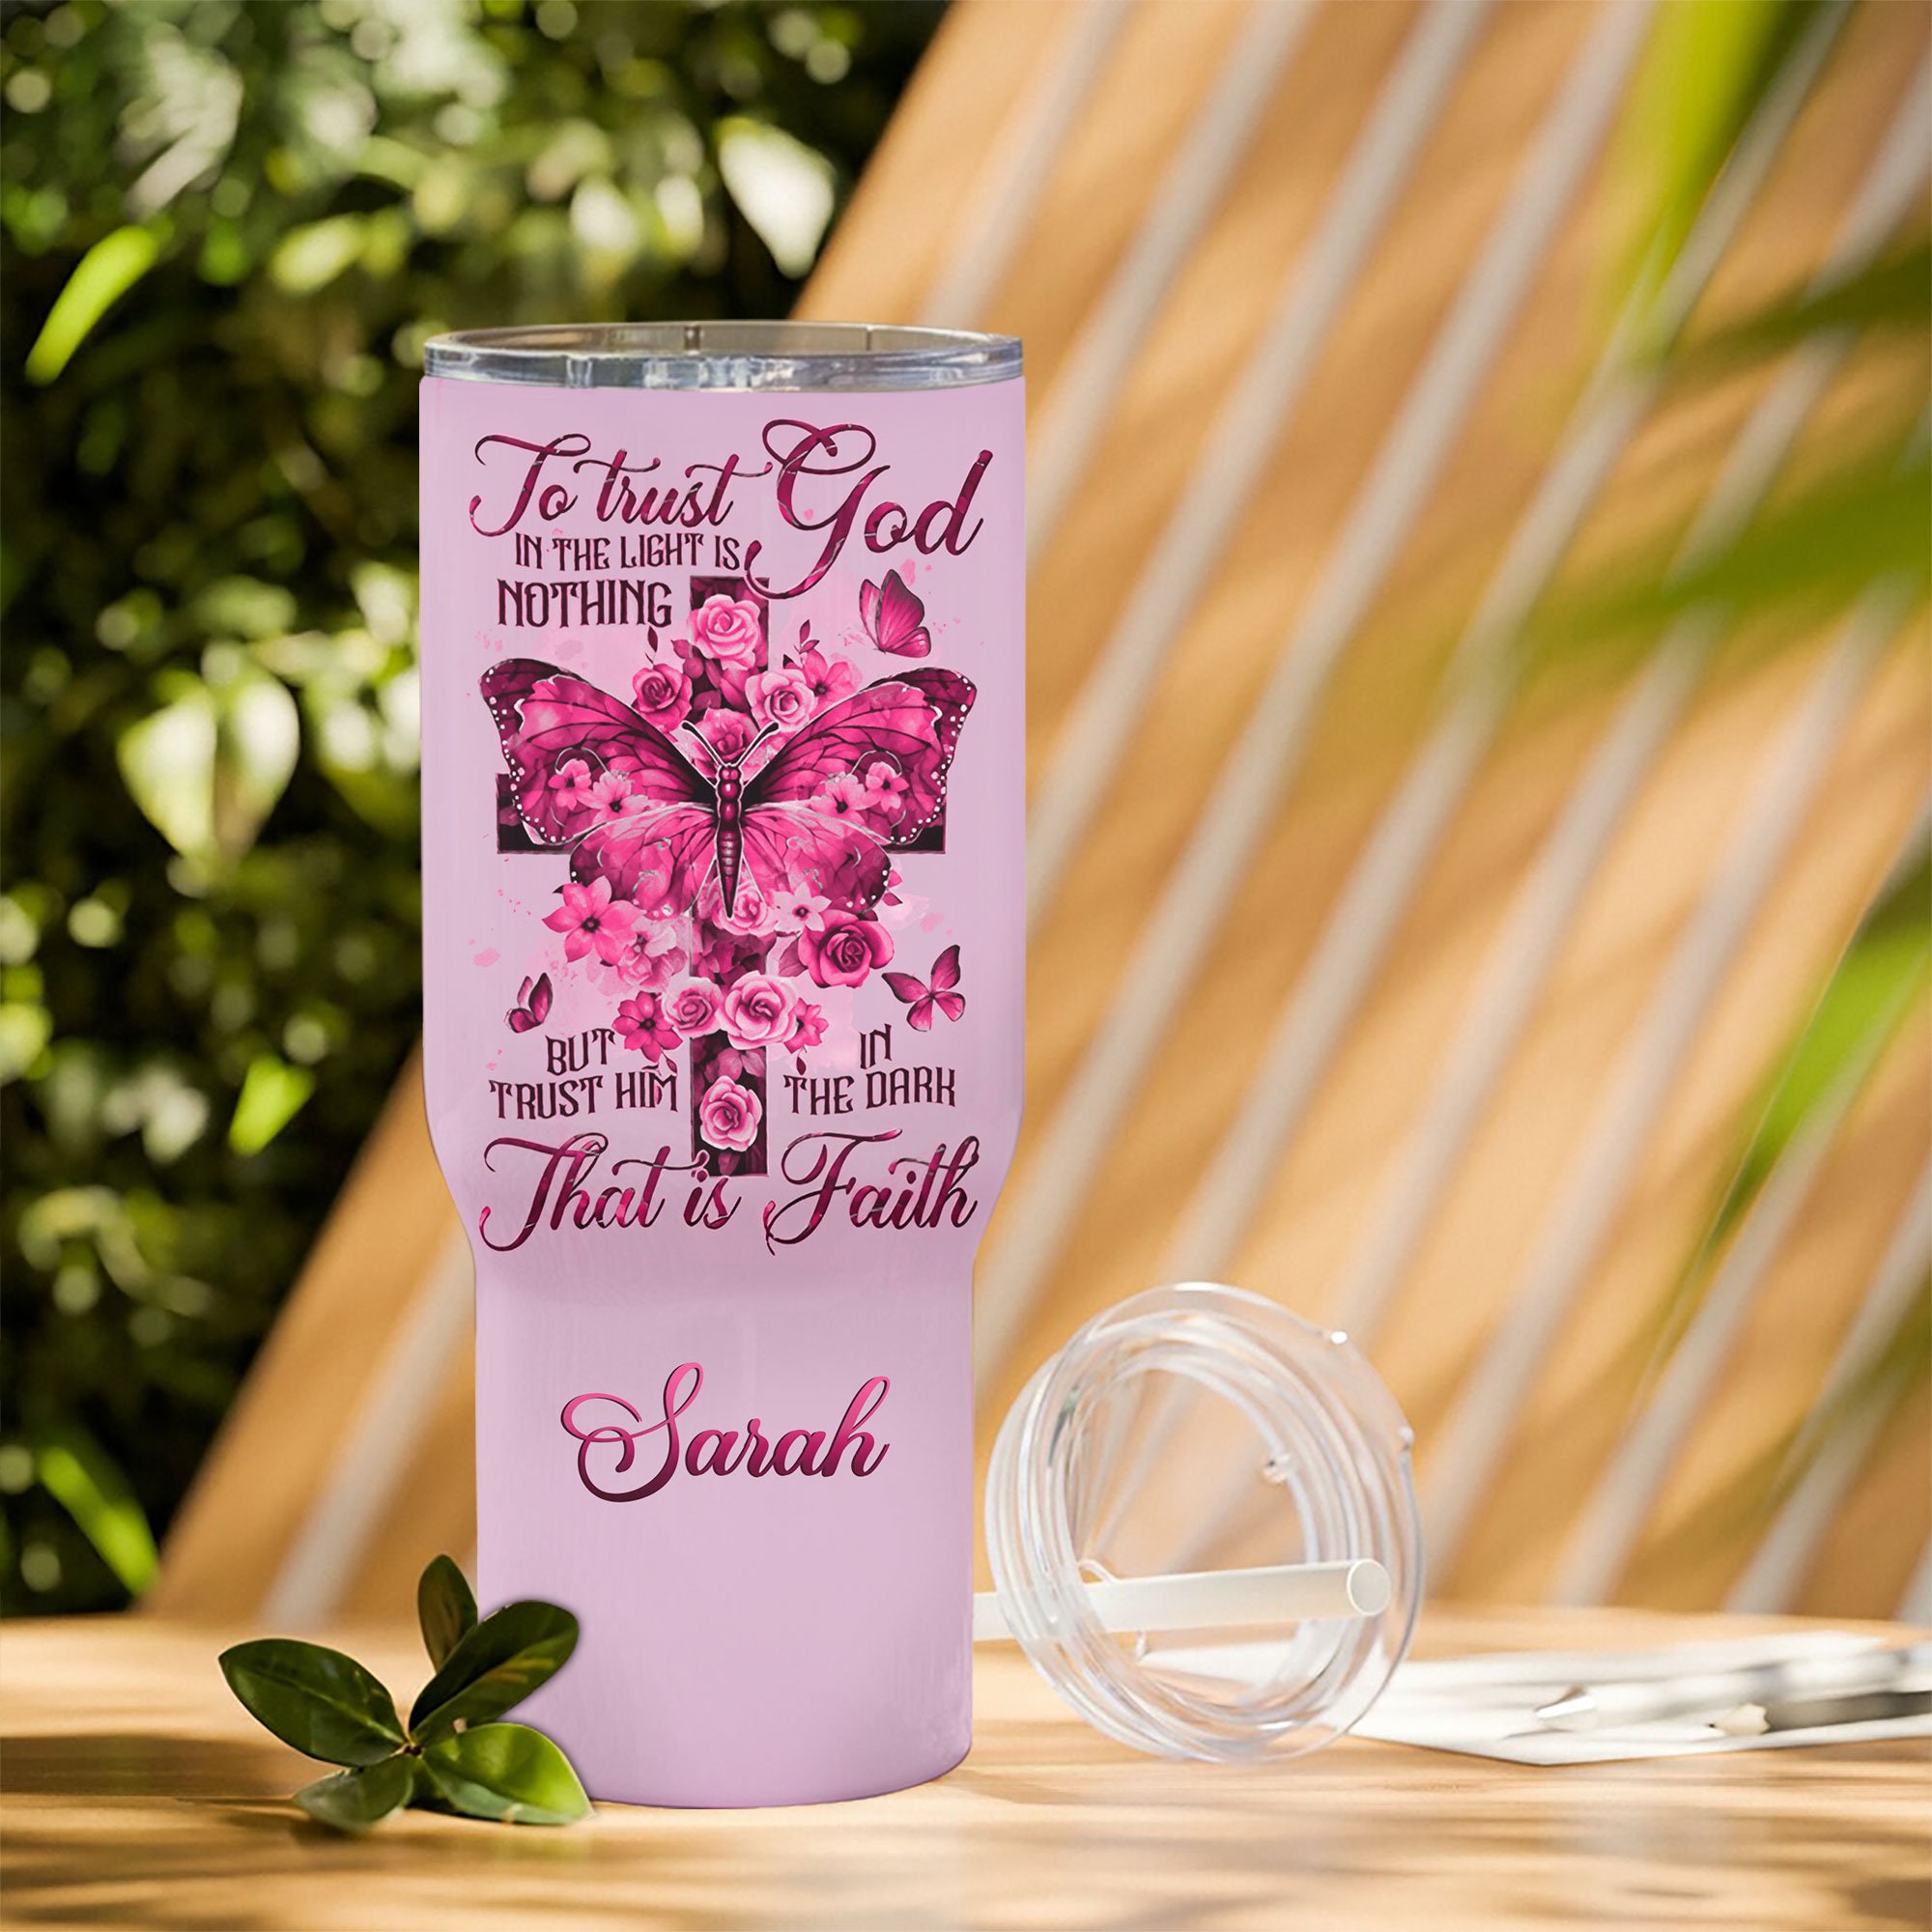 Personalized Jesus And Cross Butterfly 40 Oz Tumbler, Trust Him In The Dark That Is Faith